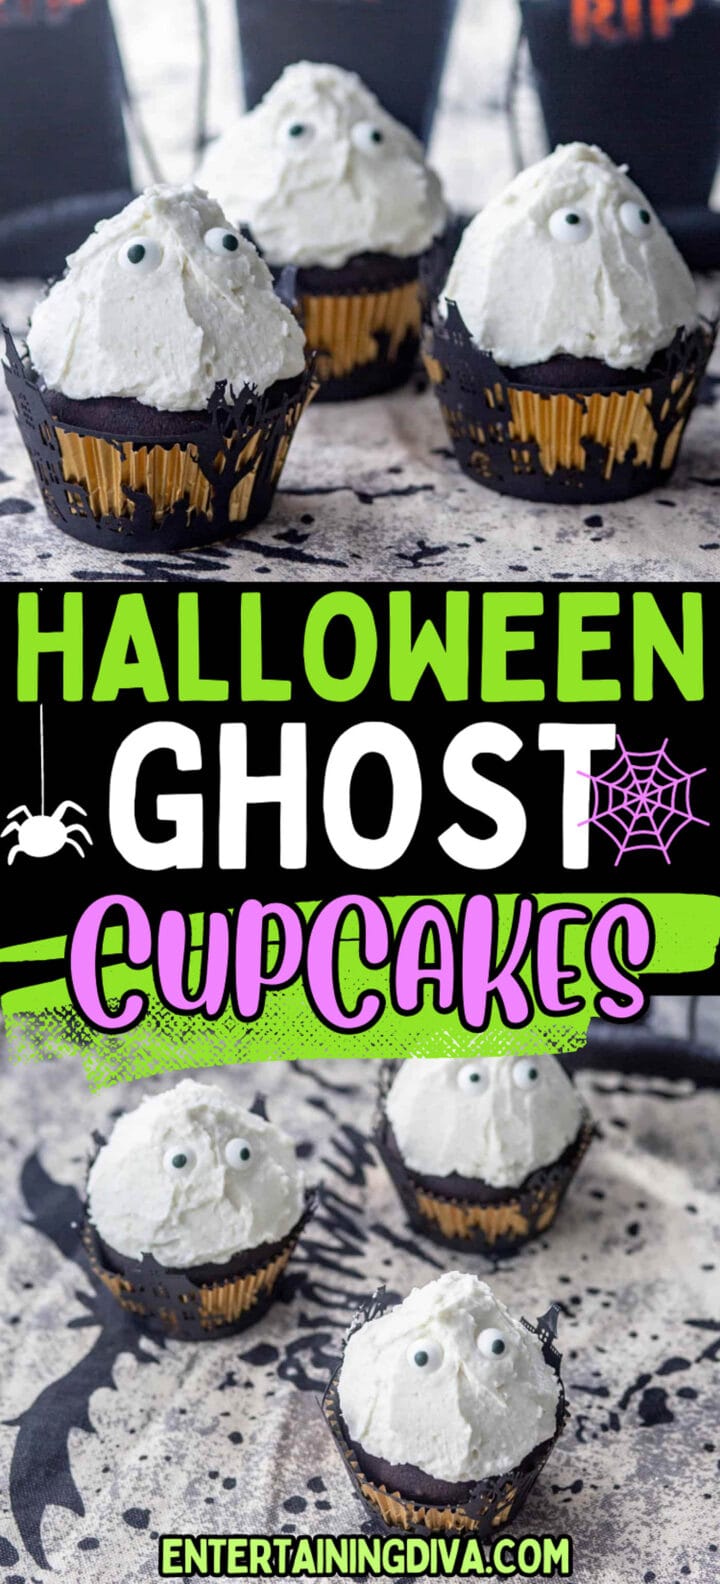 Halloween ghost cupcakes decorated with spooky ghosts.